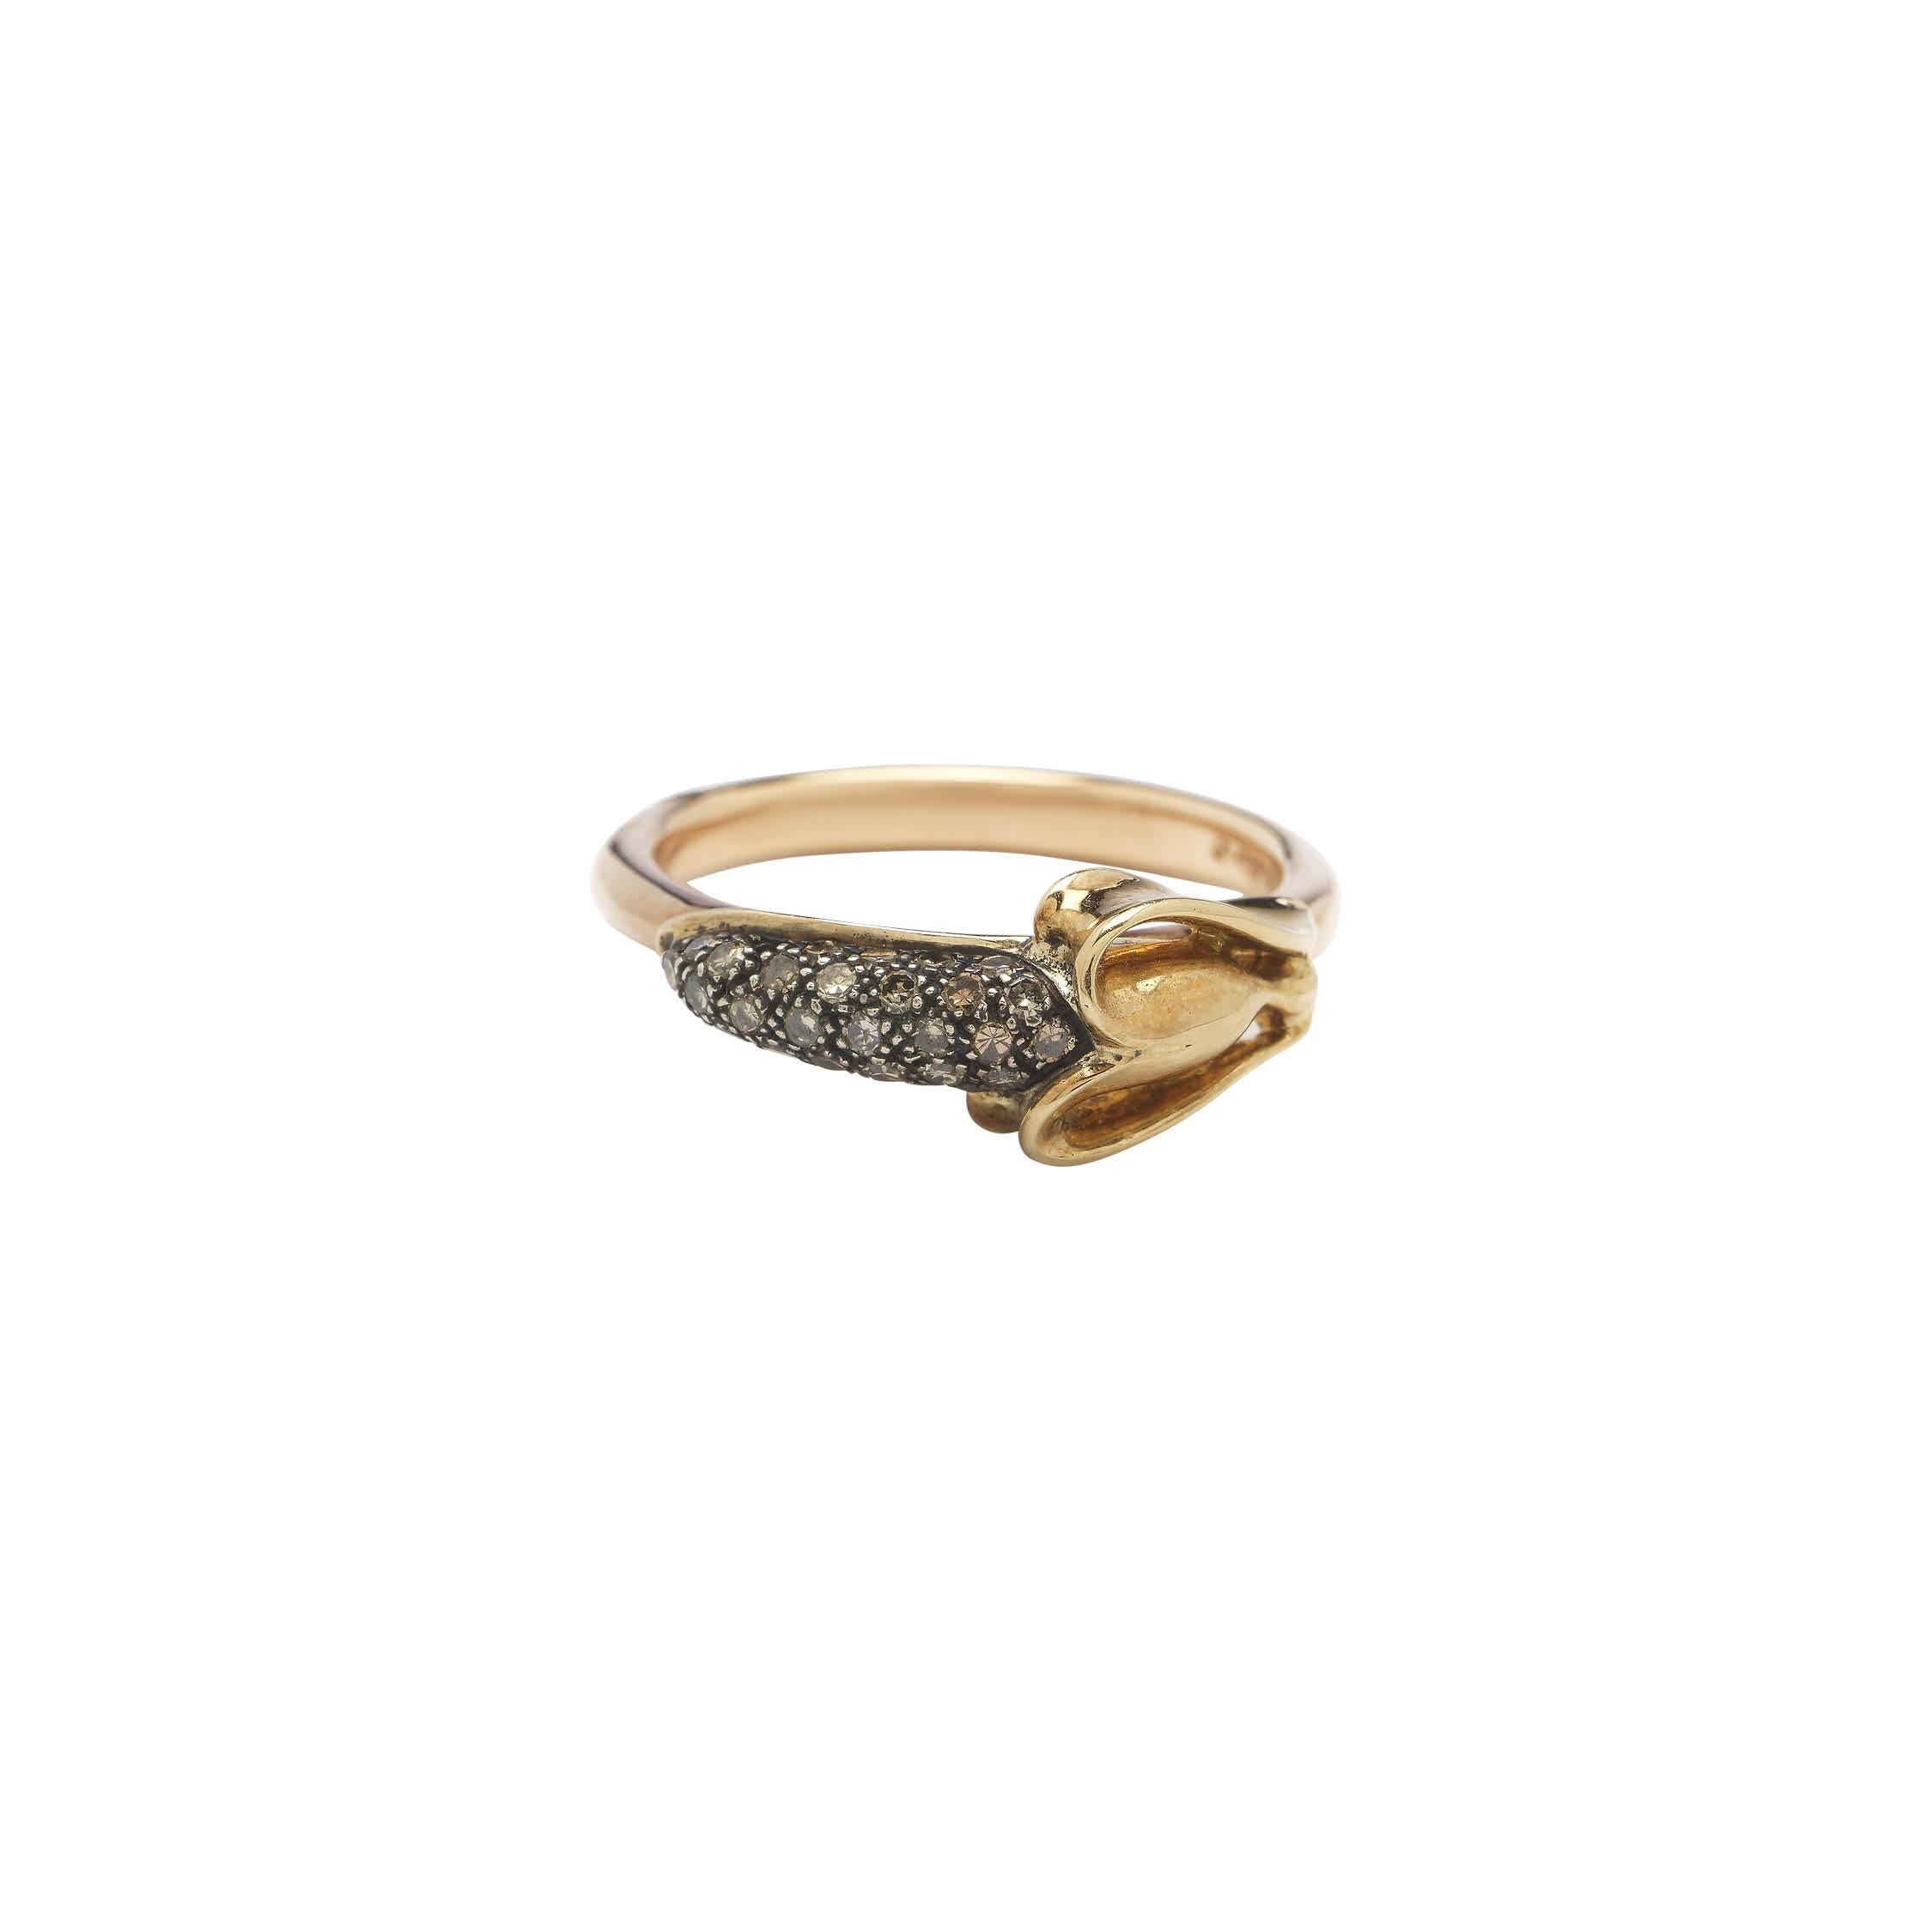 

Designed in 18k rose gold, this stackable ring is set with a peeled banana motif in 18k yellow gold and sterling silver, with the fruit inside embellished with brown diamonds. A sweet nod to the monkeys of the collection’s name.

Materials: 18k